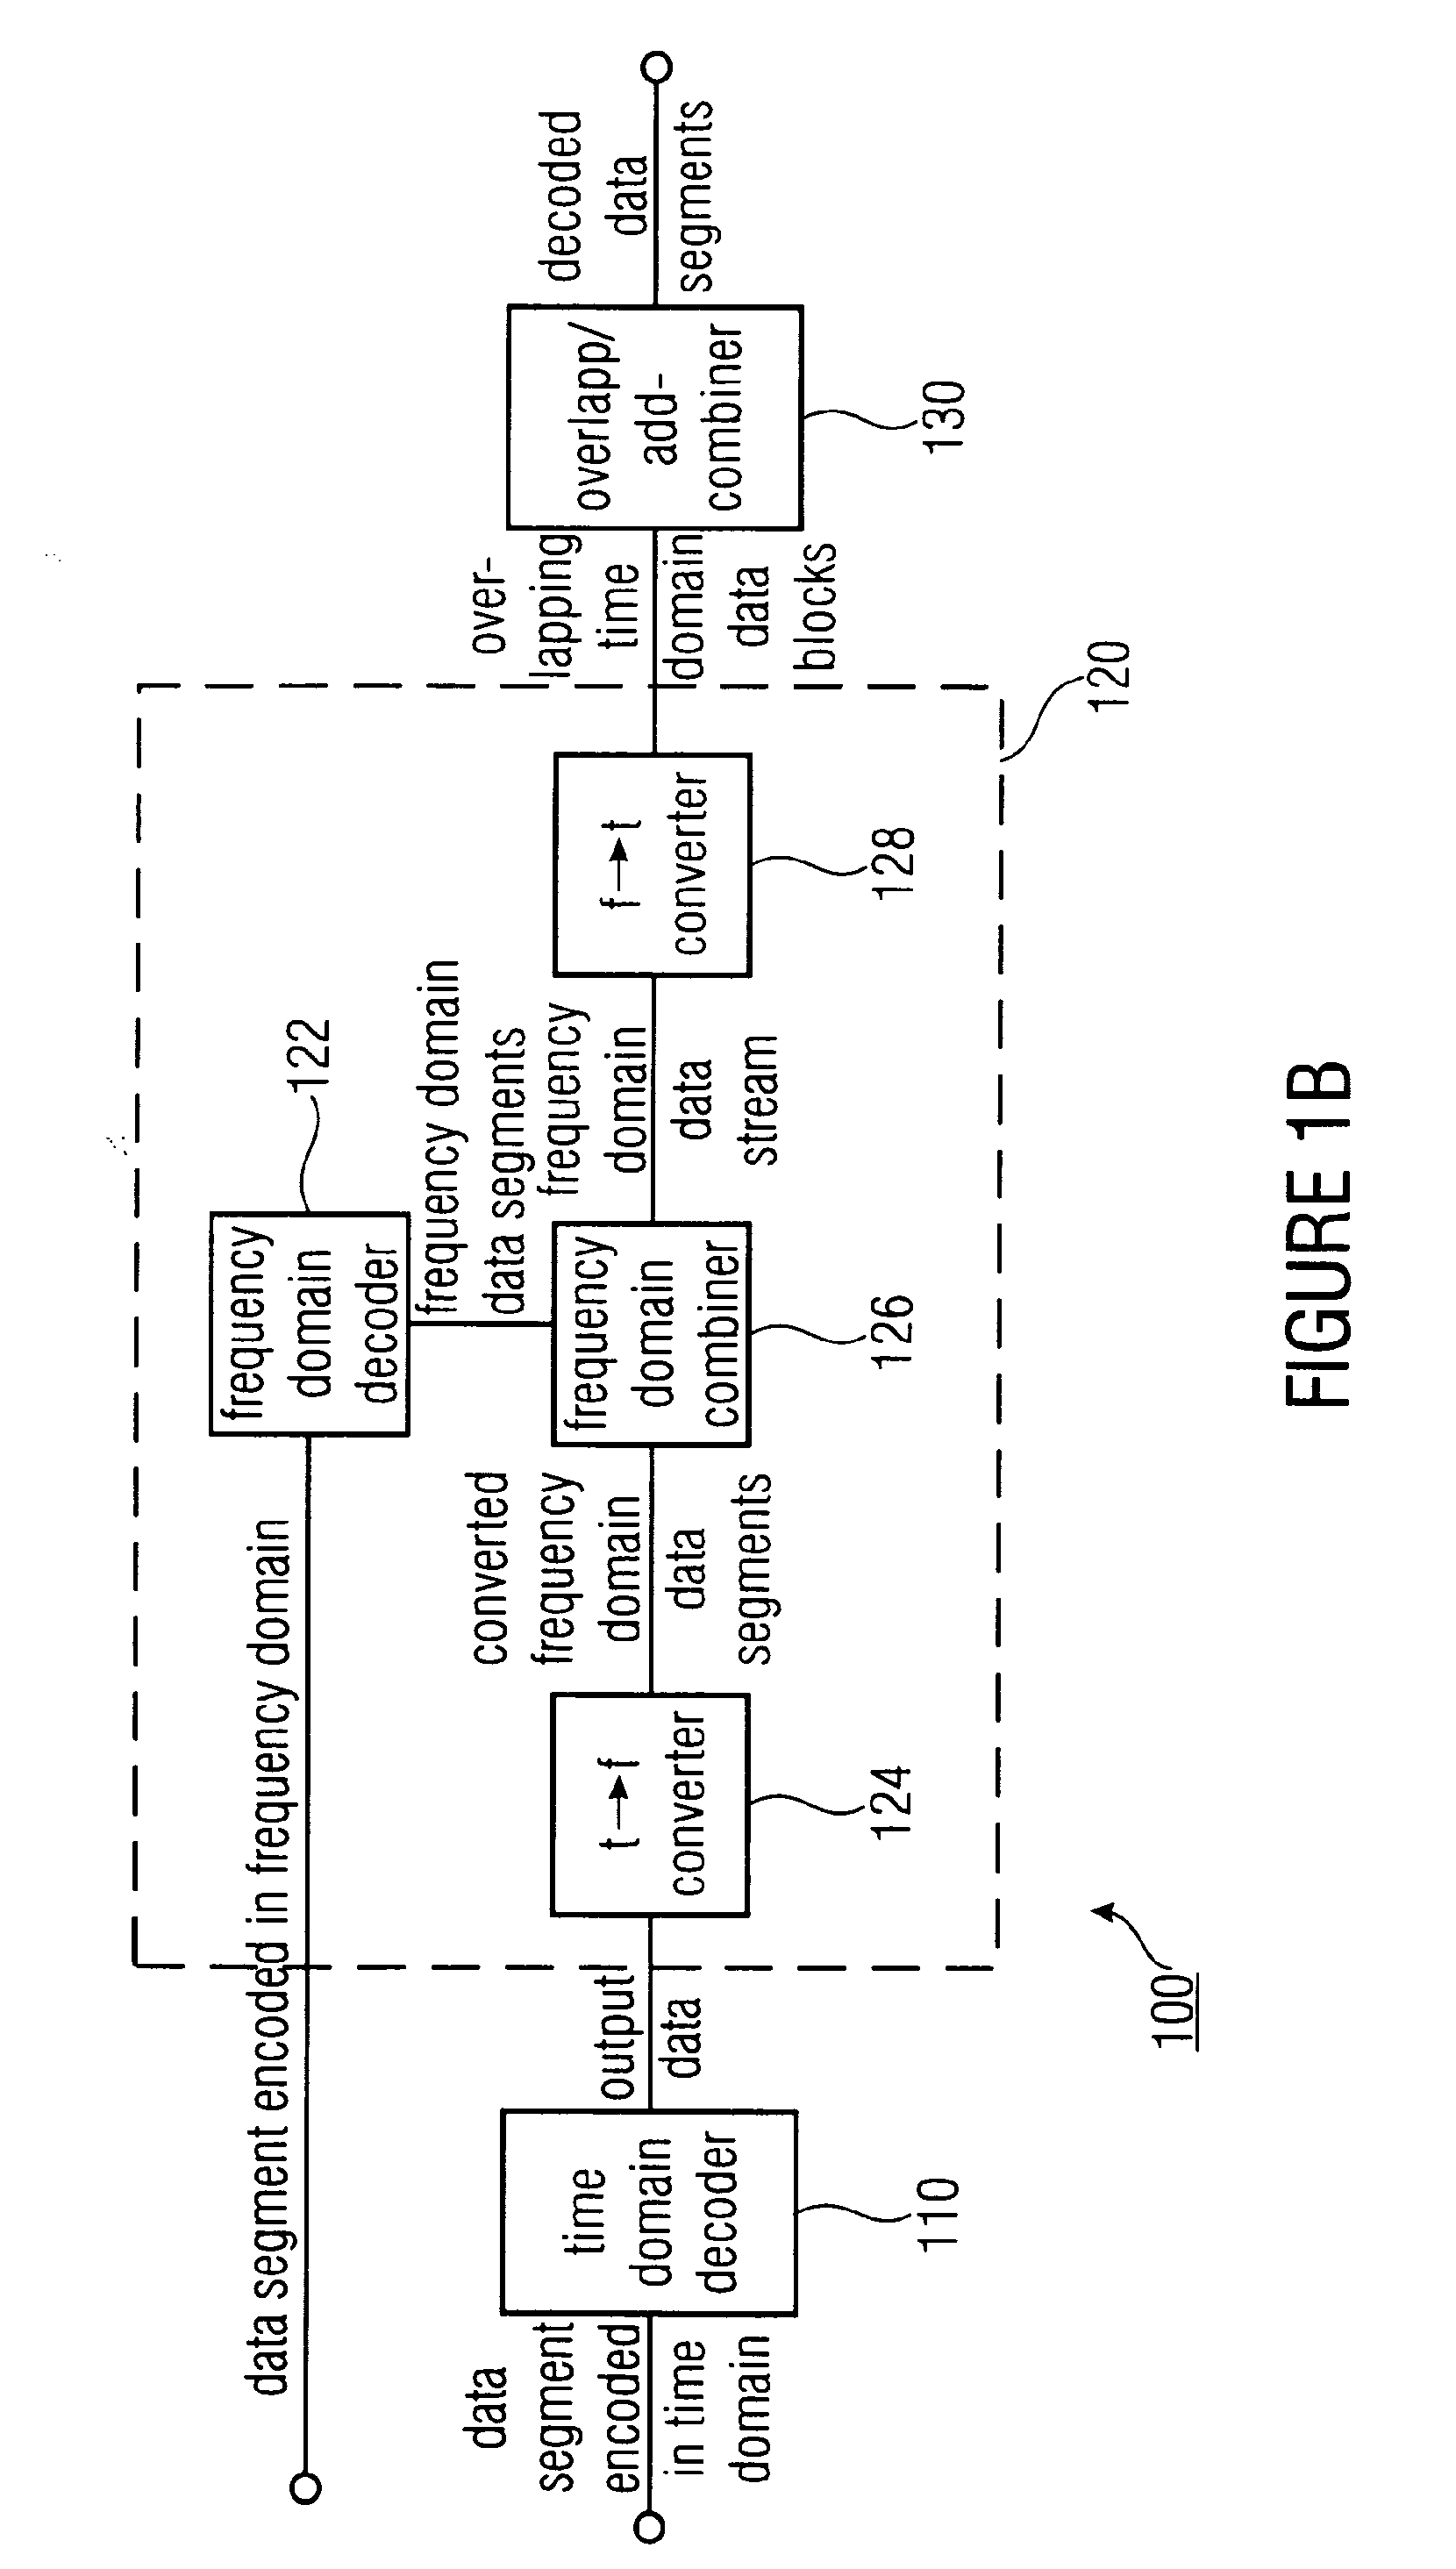 Encoder, Decoder and Methods for Encoding and Decoding Data Segments Representing a Time-Domain Data Stream